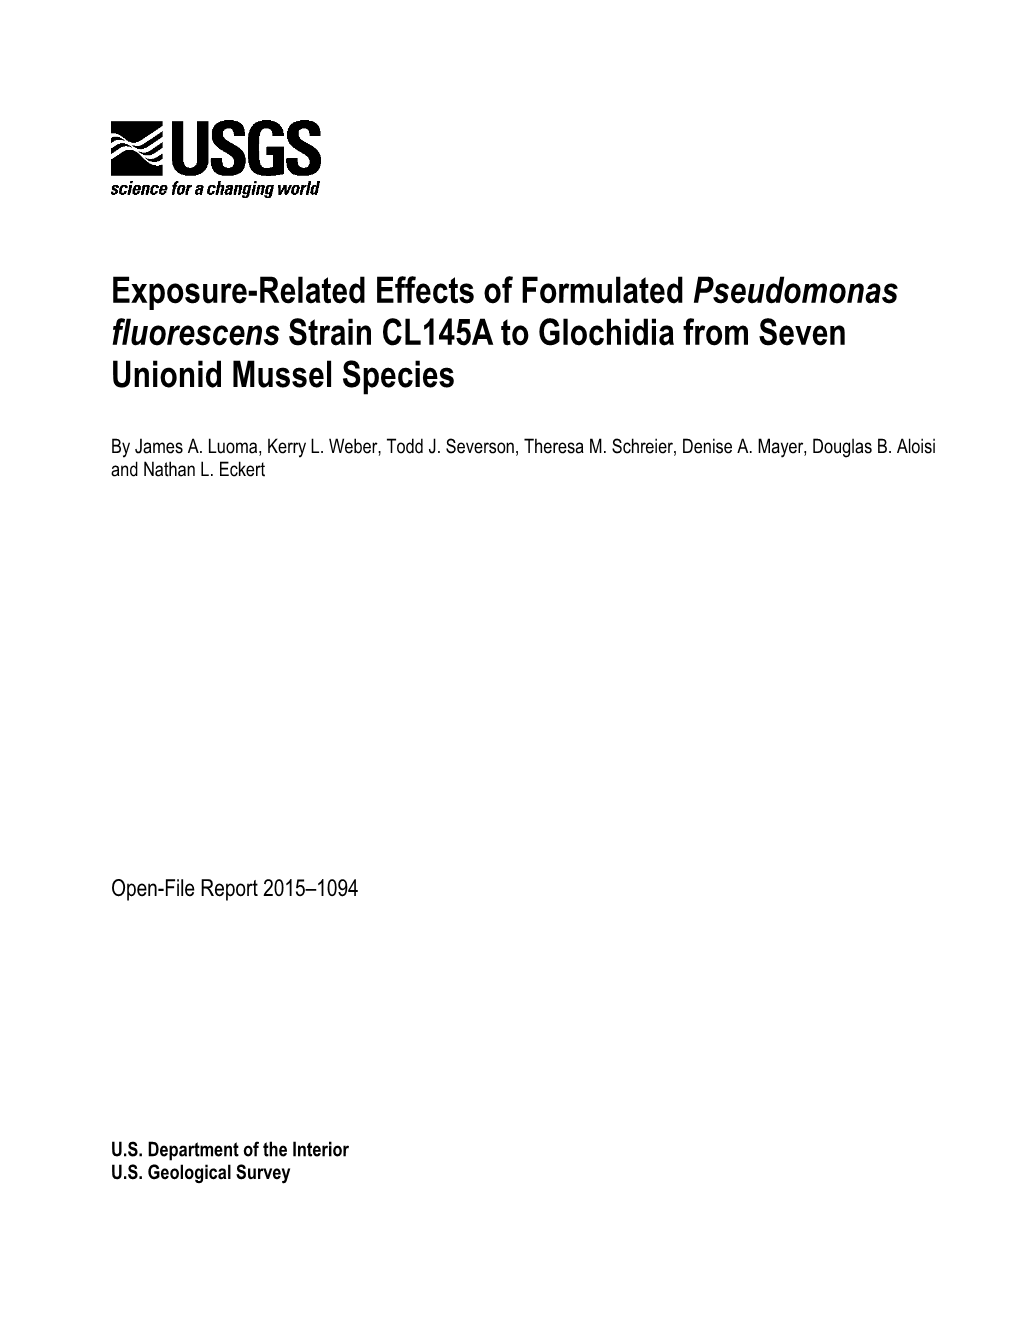 Exposure-Related Effects of Formulated Pseudomonas Fluorescens Strain CL145A to Glochidia from Seven Unionid Mussel Species